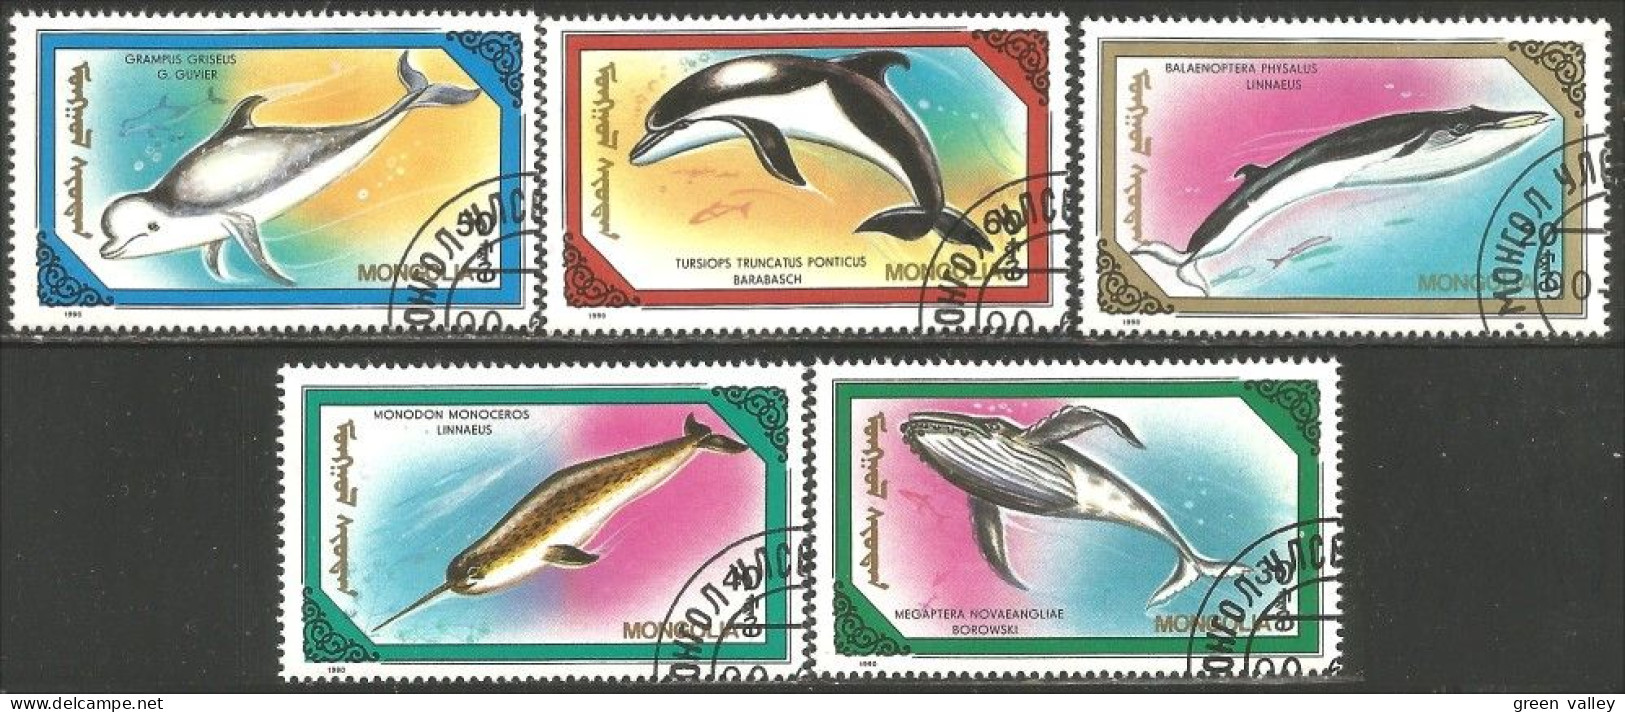 620 Mongolie Baleines Whales Cachalots Balena Capodoglio Ballena Wal Pottwal Dauphins Dolphins Delphin (MNG-76) - Ballenas